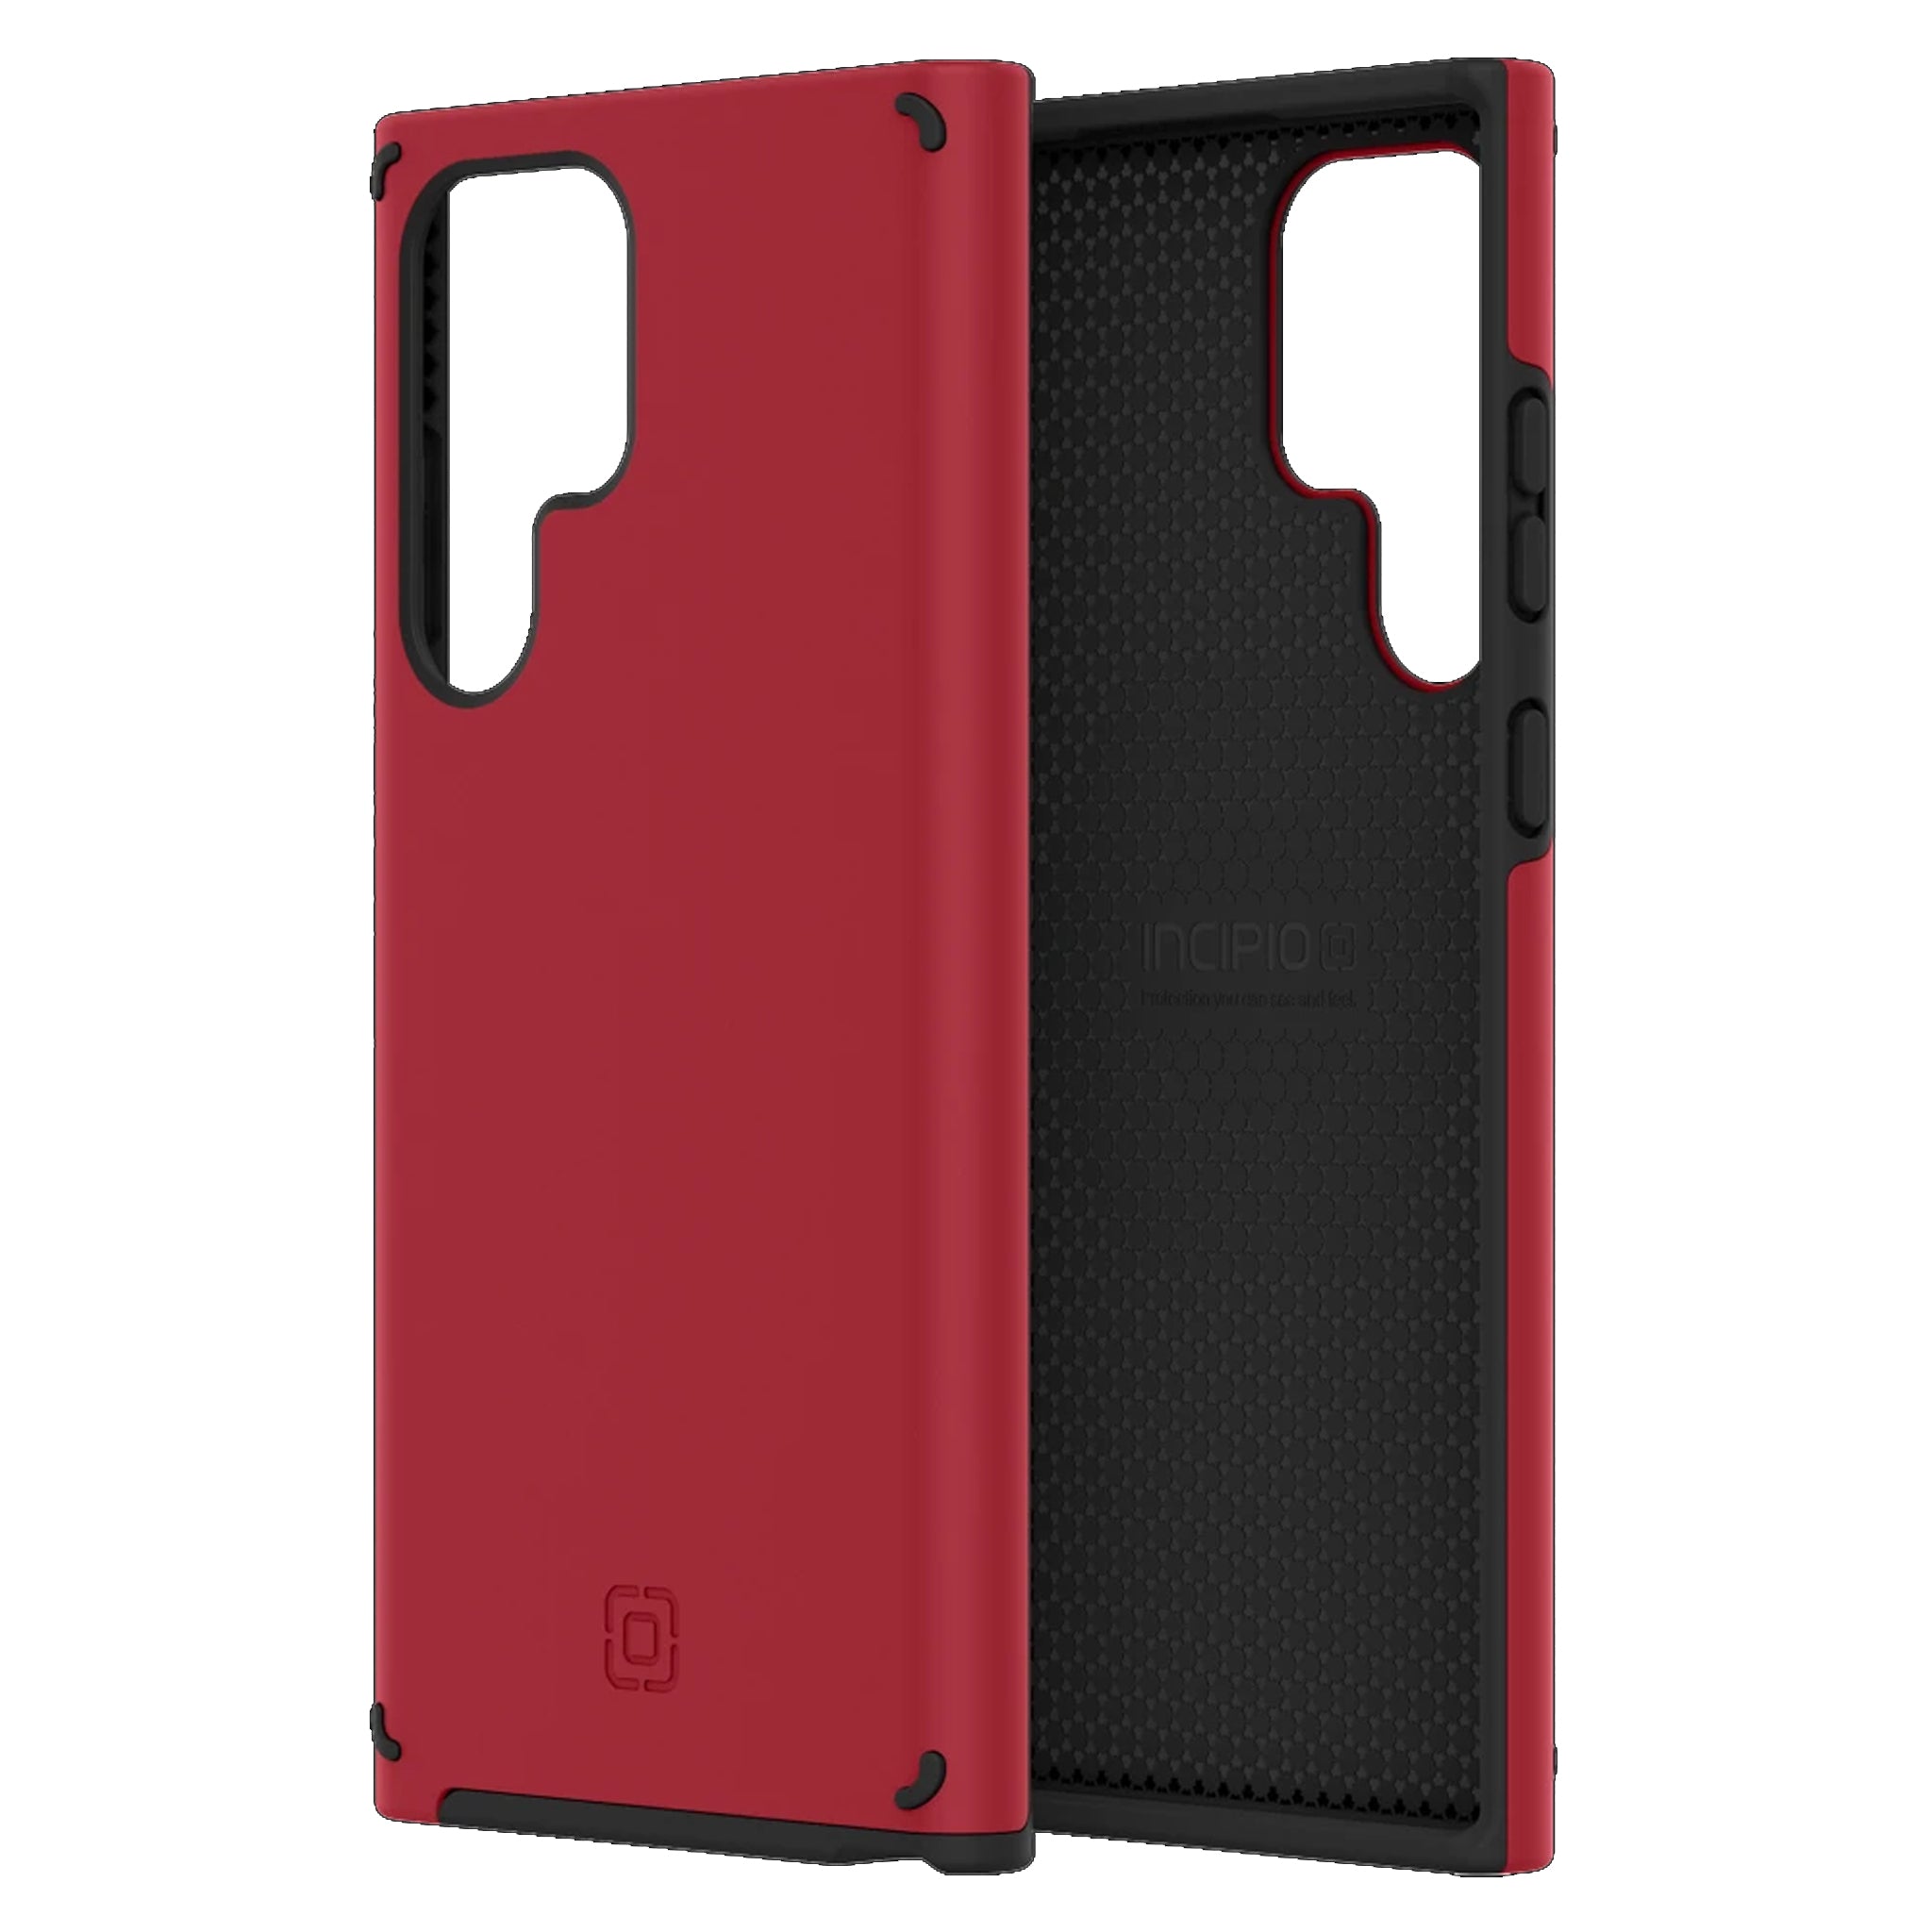 Incipio - Duo Case For Samsung Galaxy S22 Ultra - Salsa Red and Black